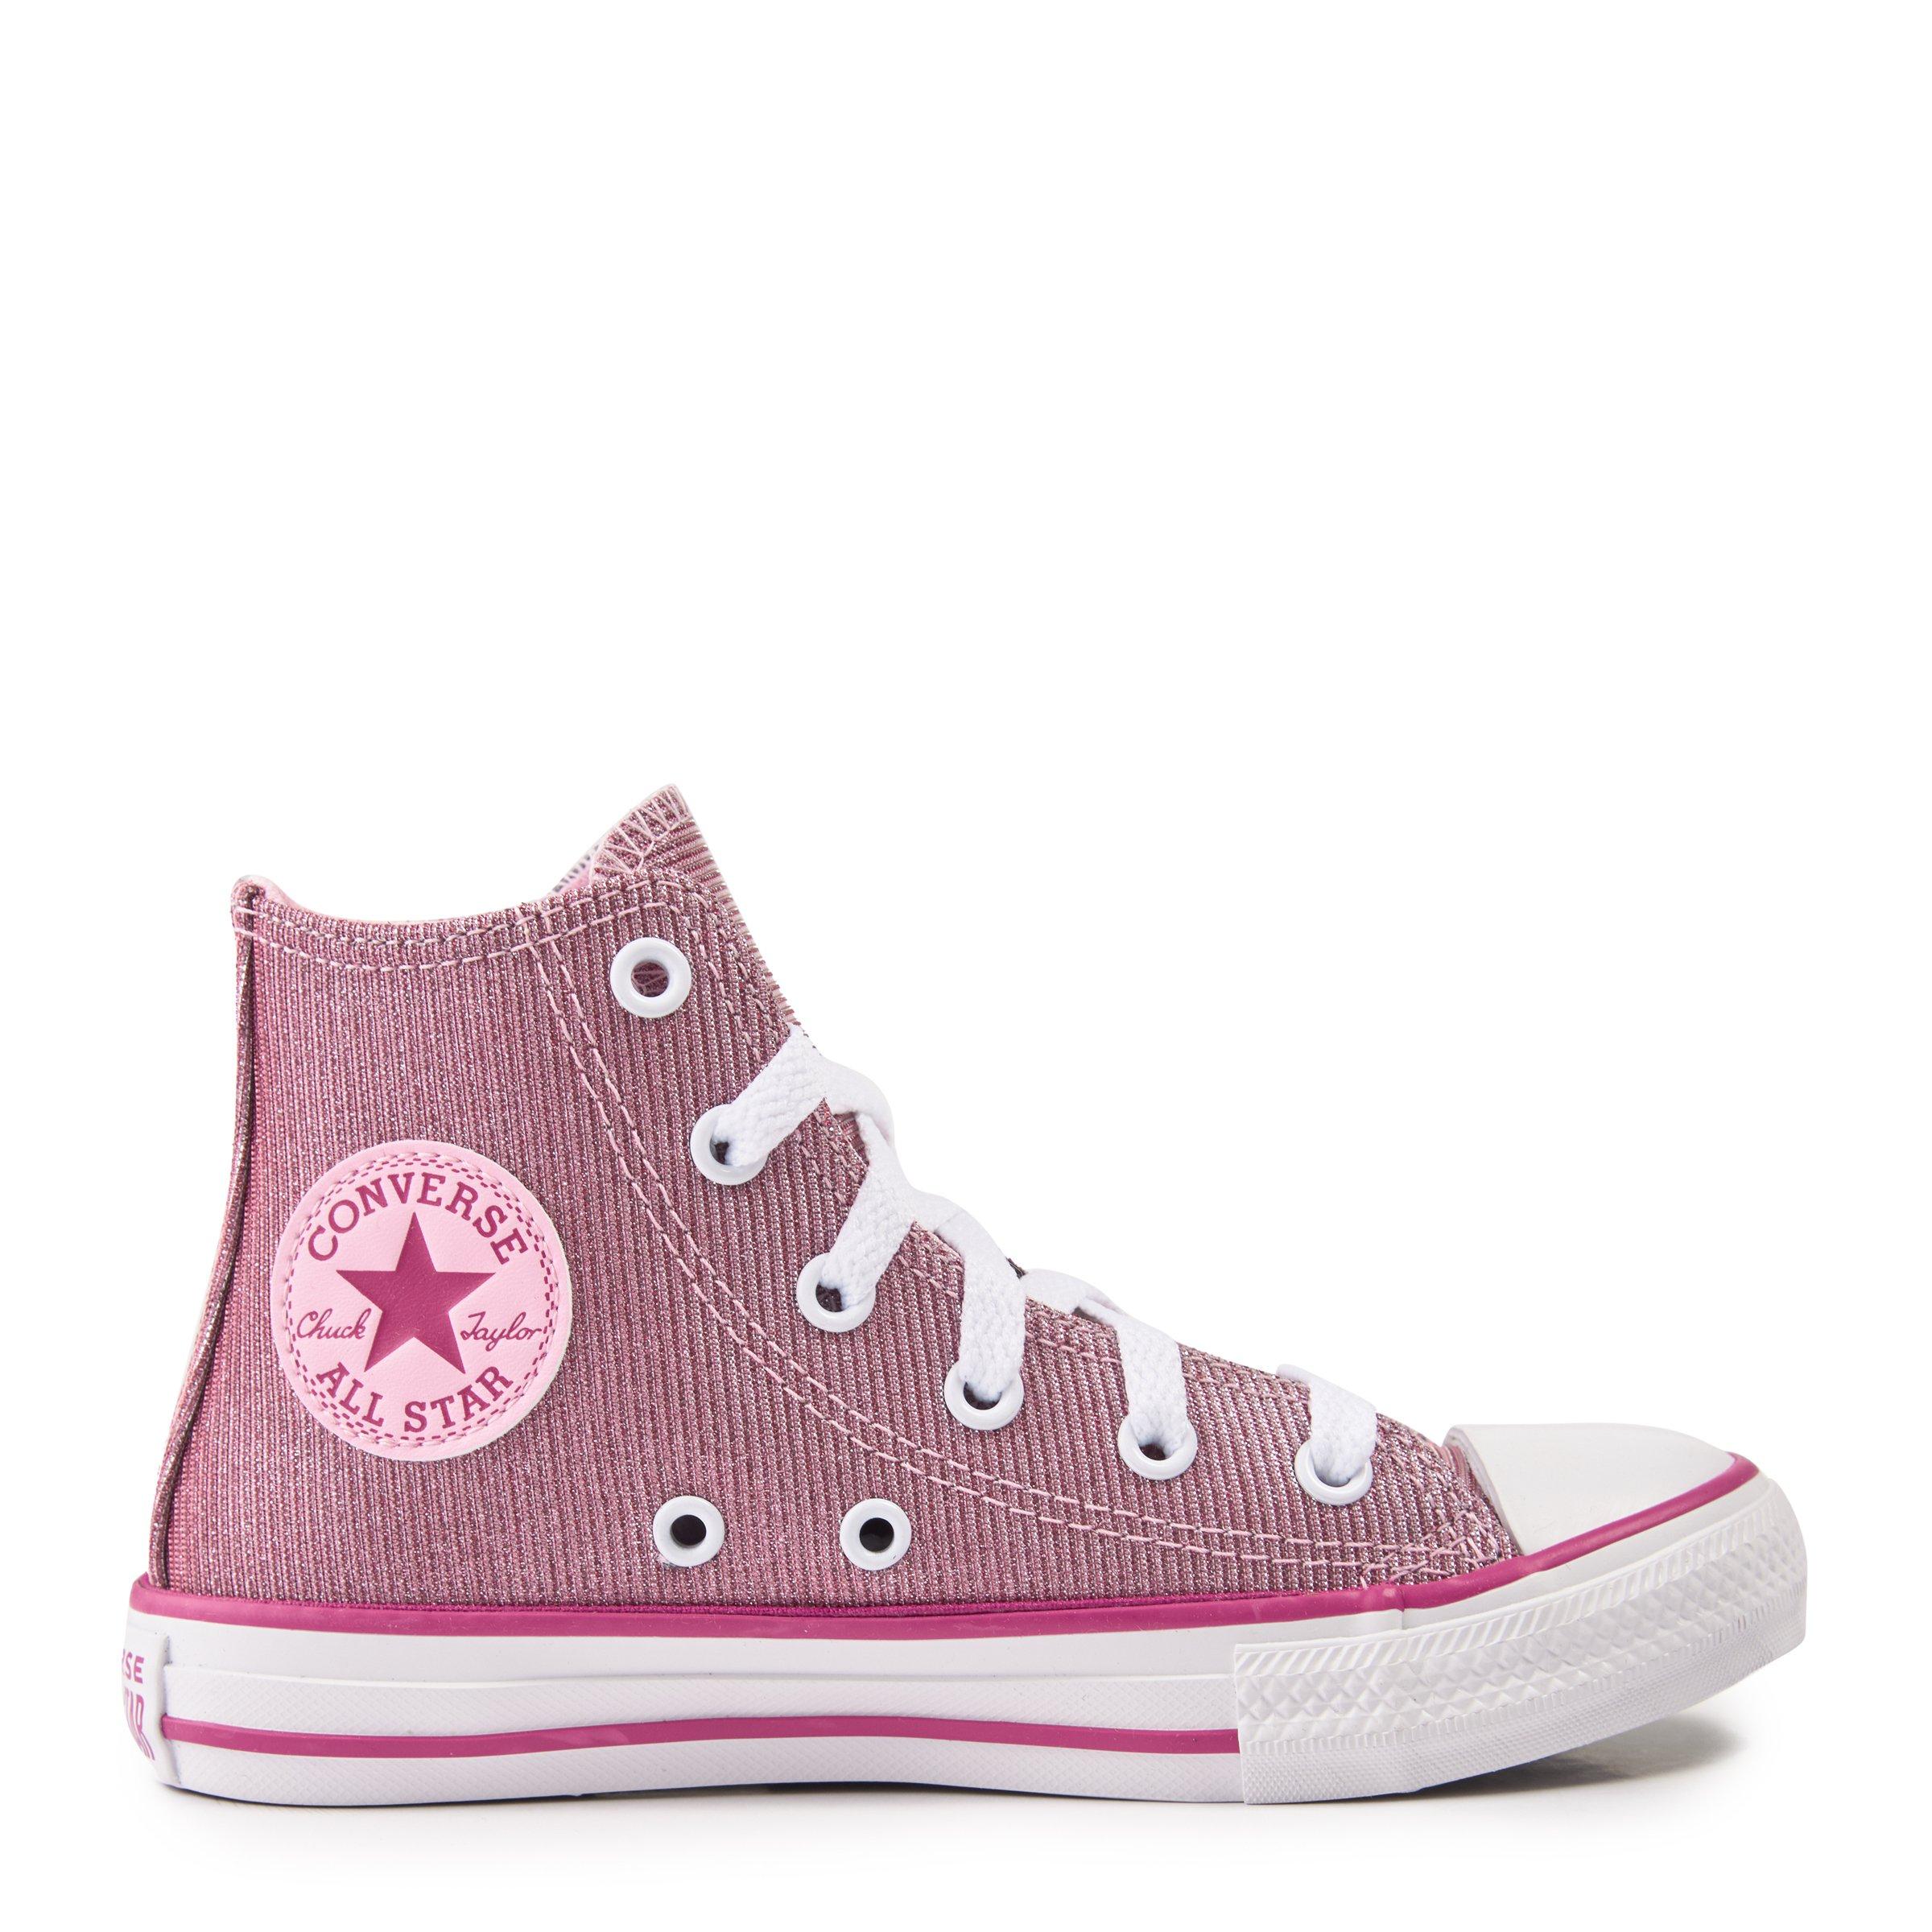 Buy Converse Chuck Taylor All Star High Glitter Sneakers Online Office London